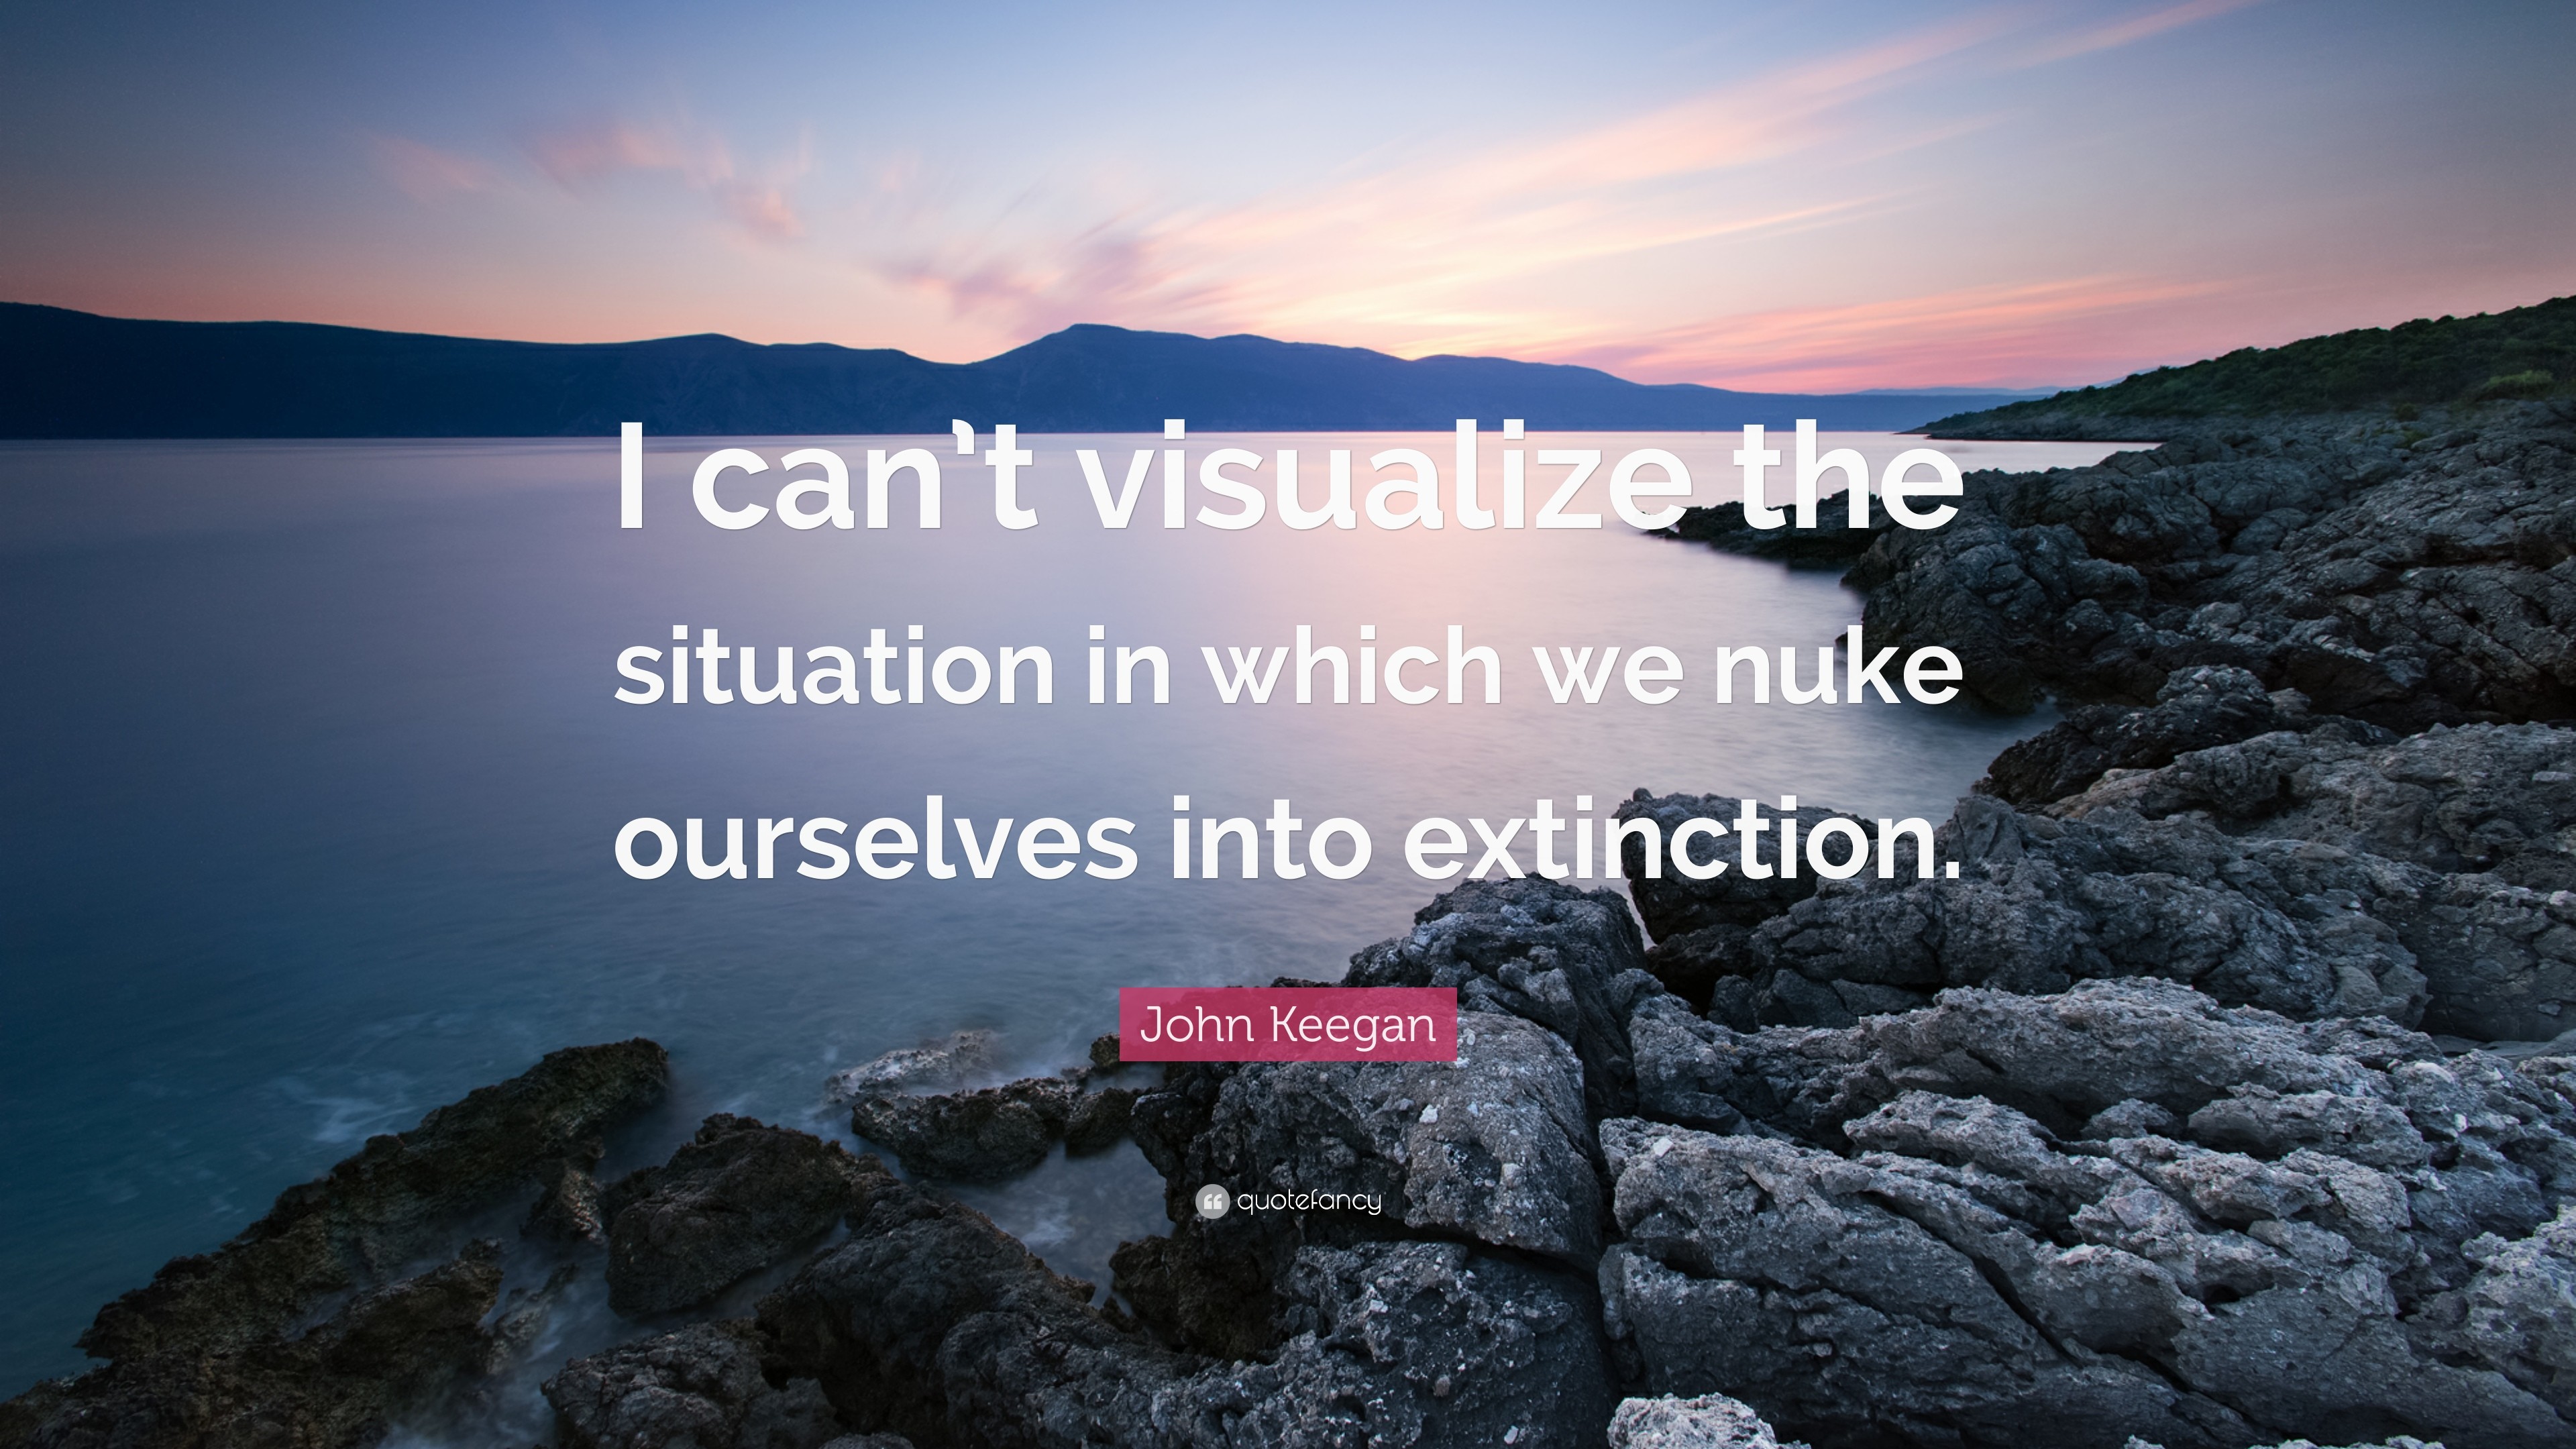 3840x2160 7 wallpapers. John Keegan Quote: “I can't visualize the situation in which  we nuke